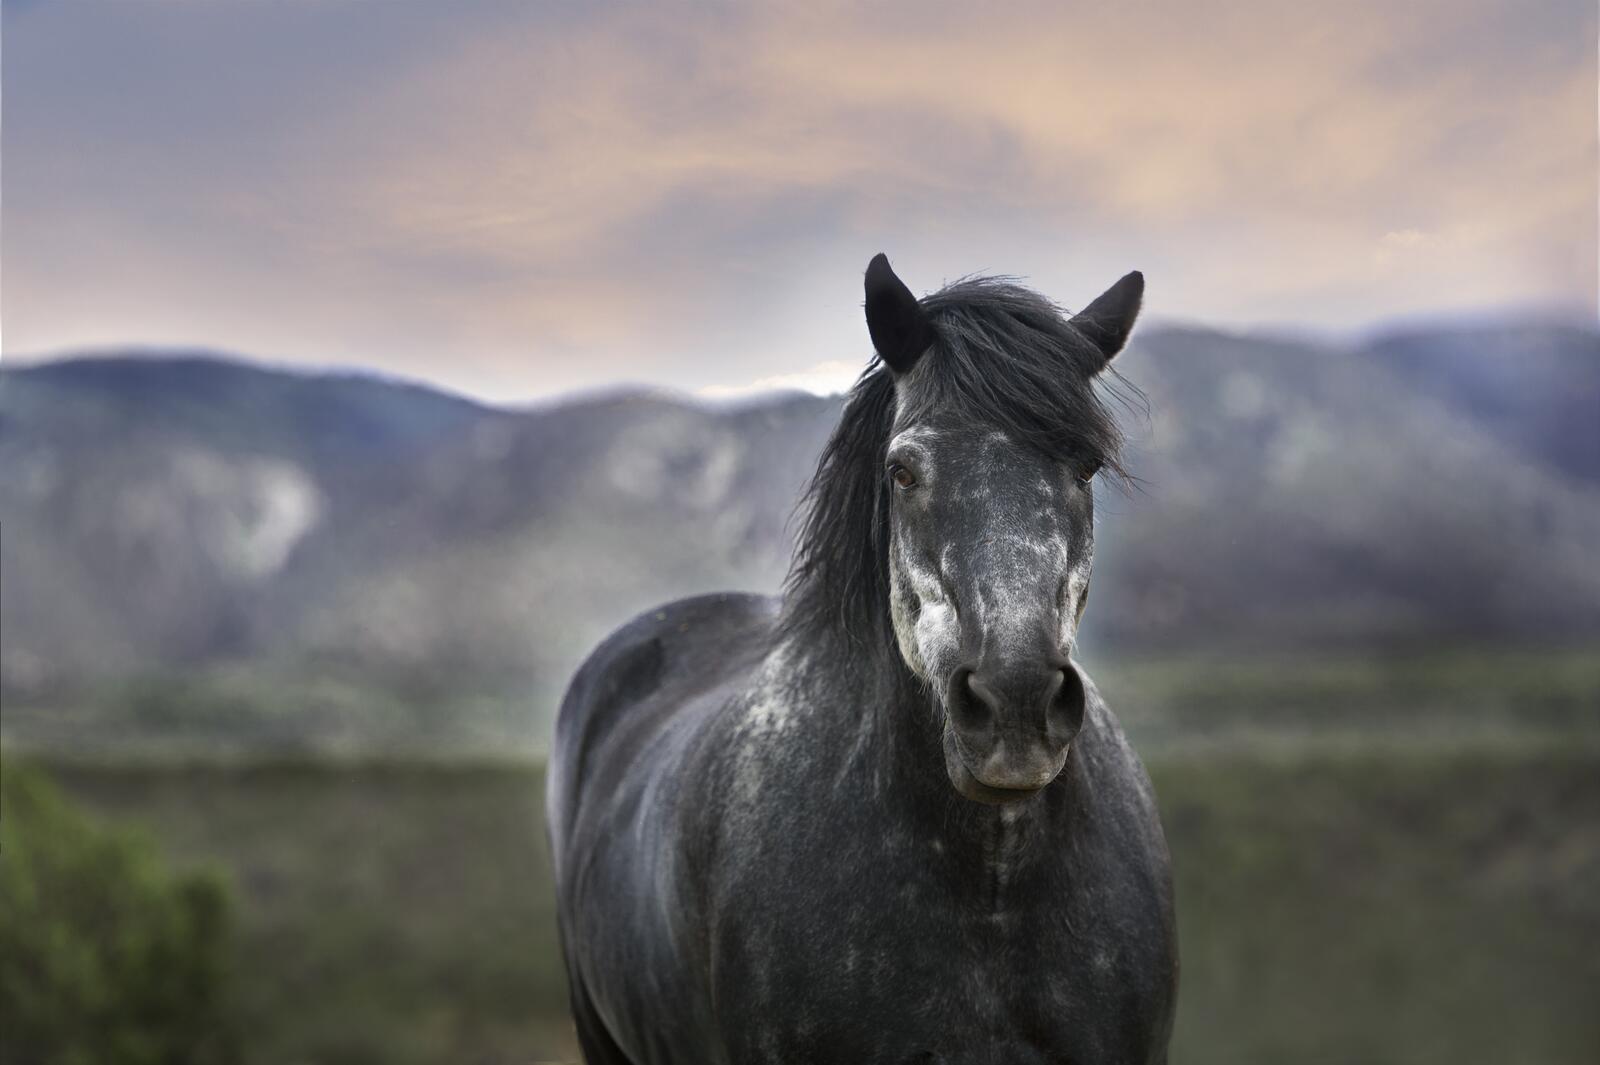 Wallpapers wallpaper horse majestic blurred on the desktop